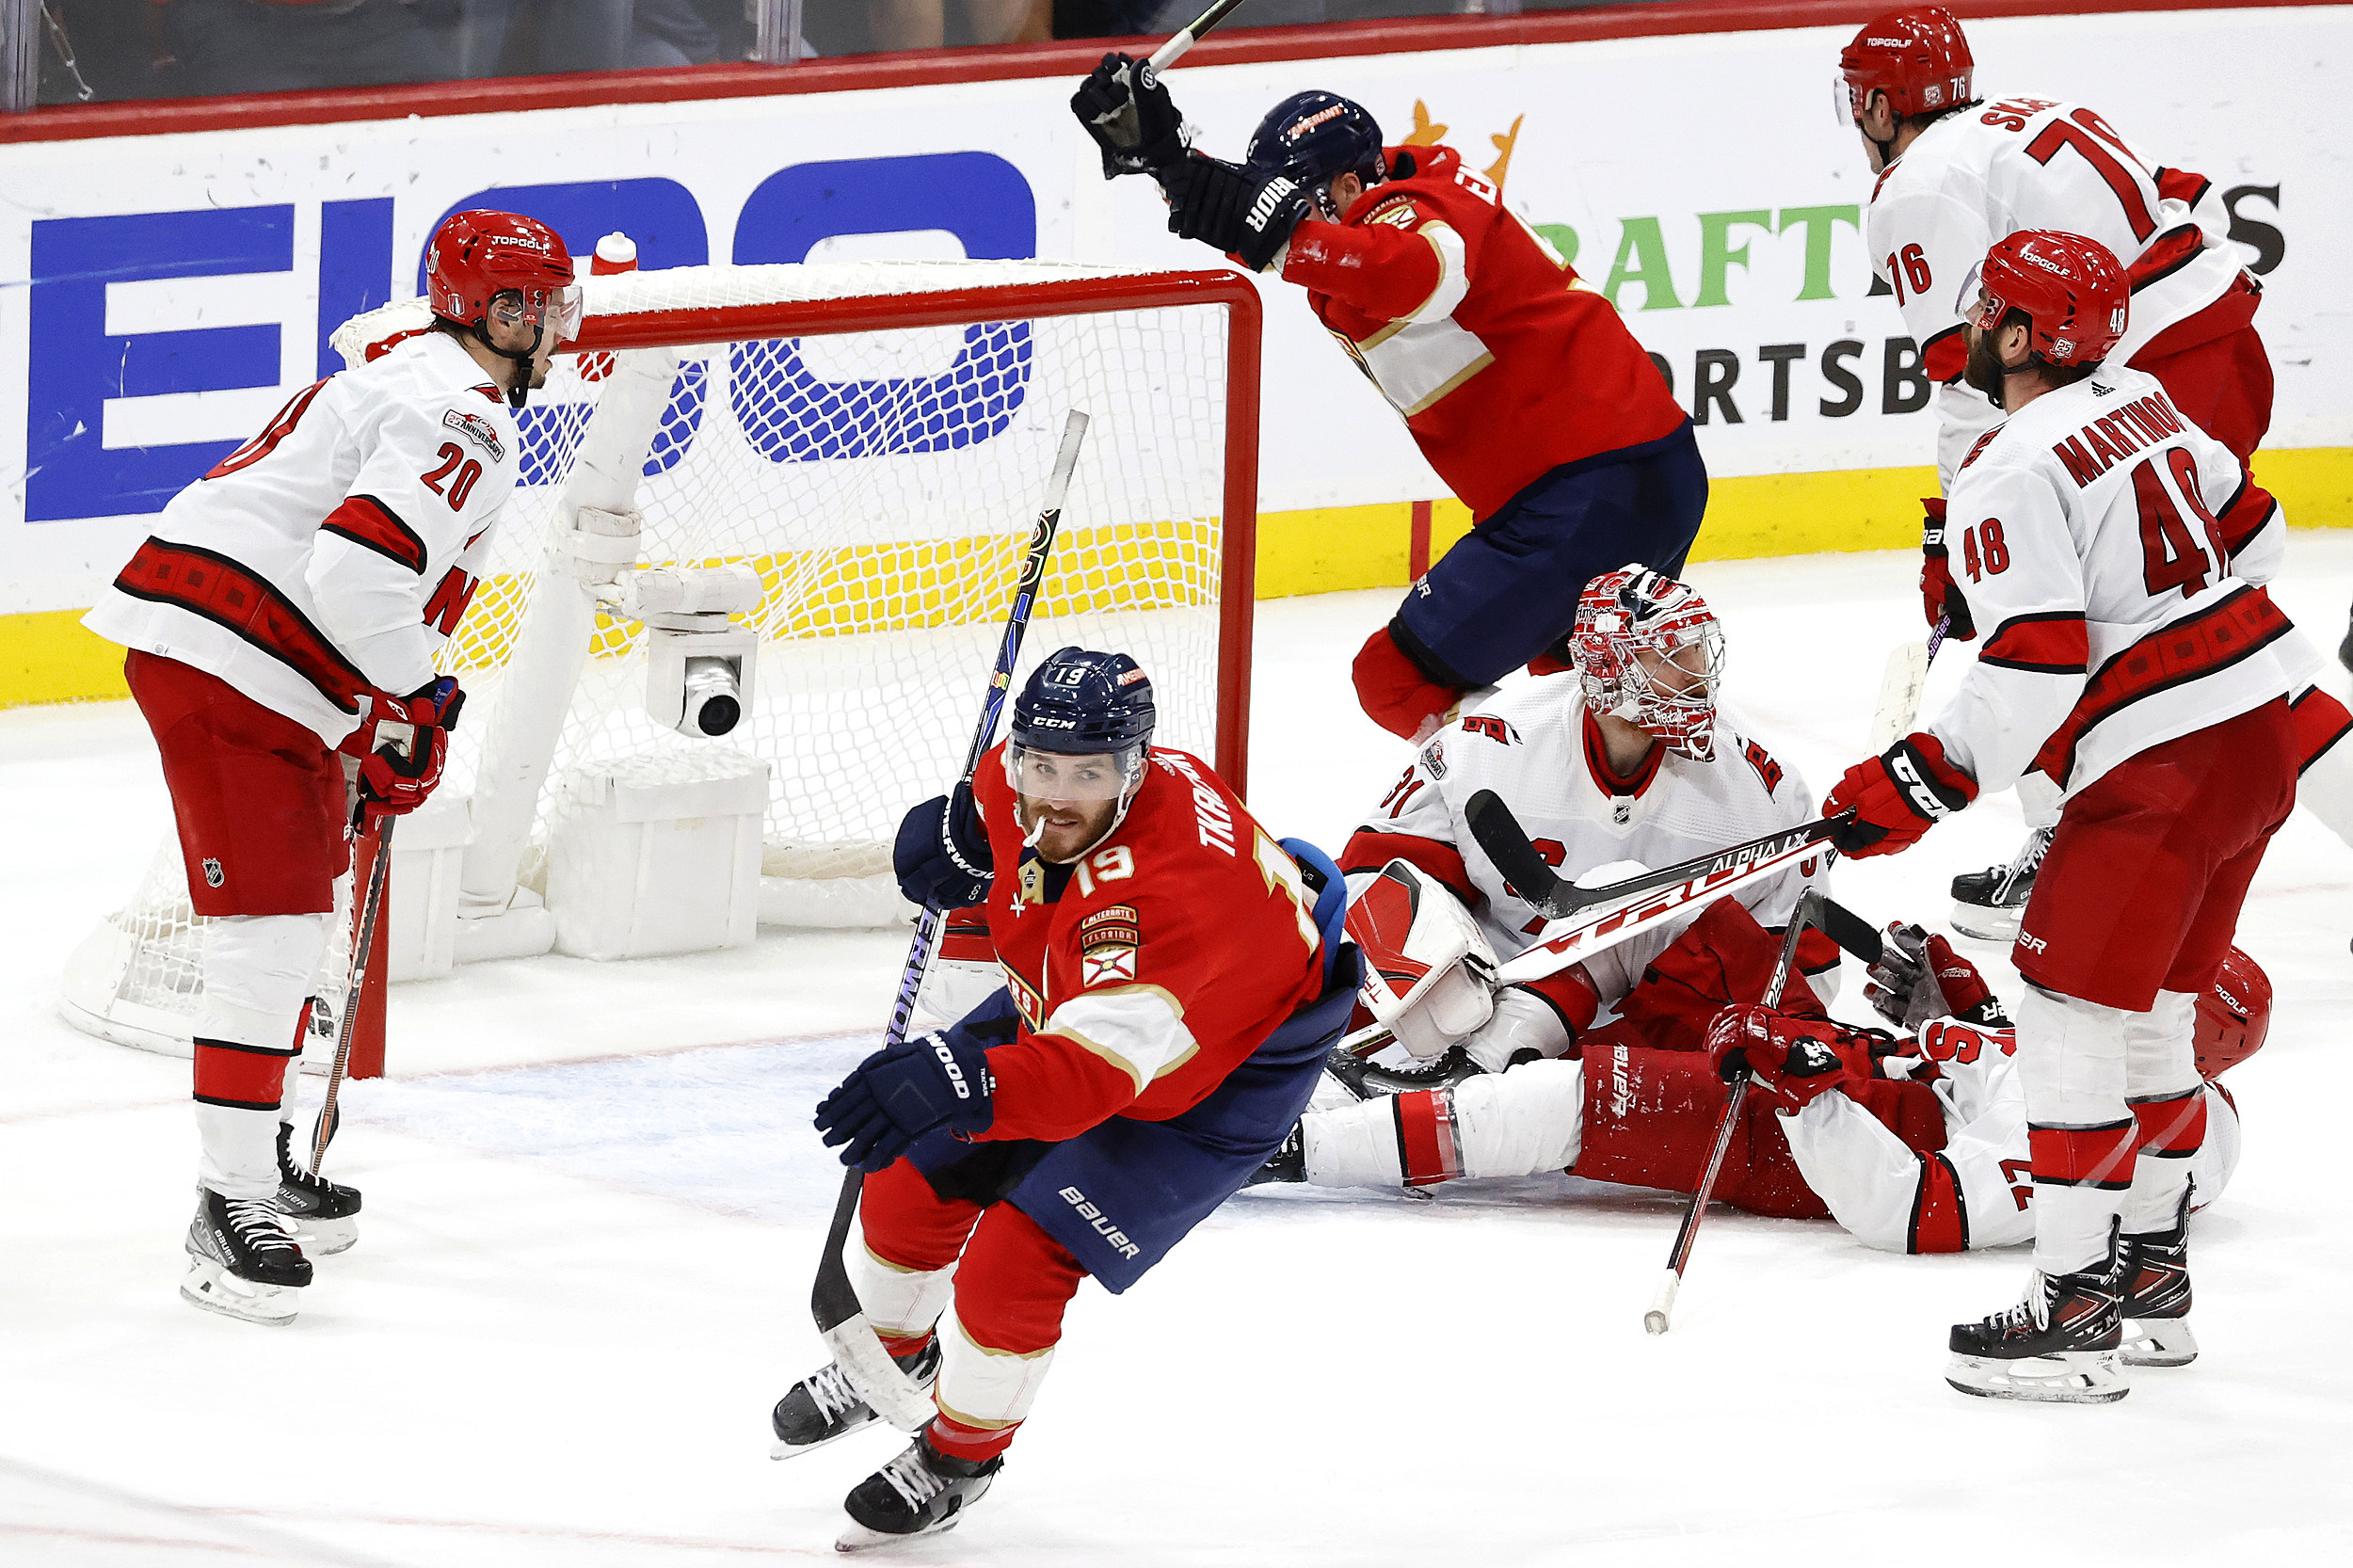 Panthers head to Stanley Cup Final after topping Hurricanes